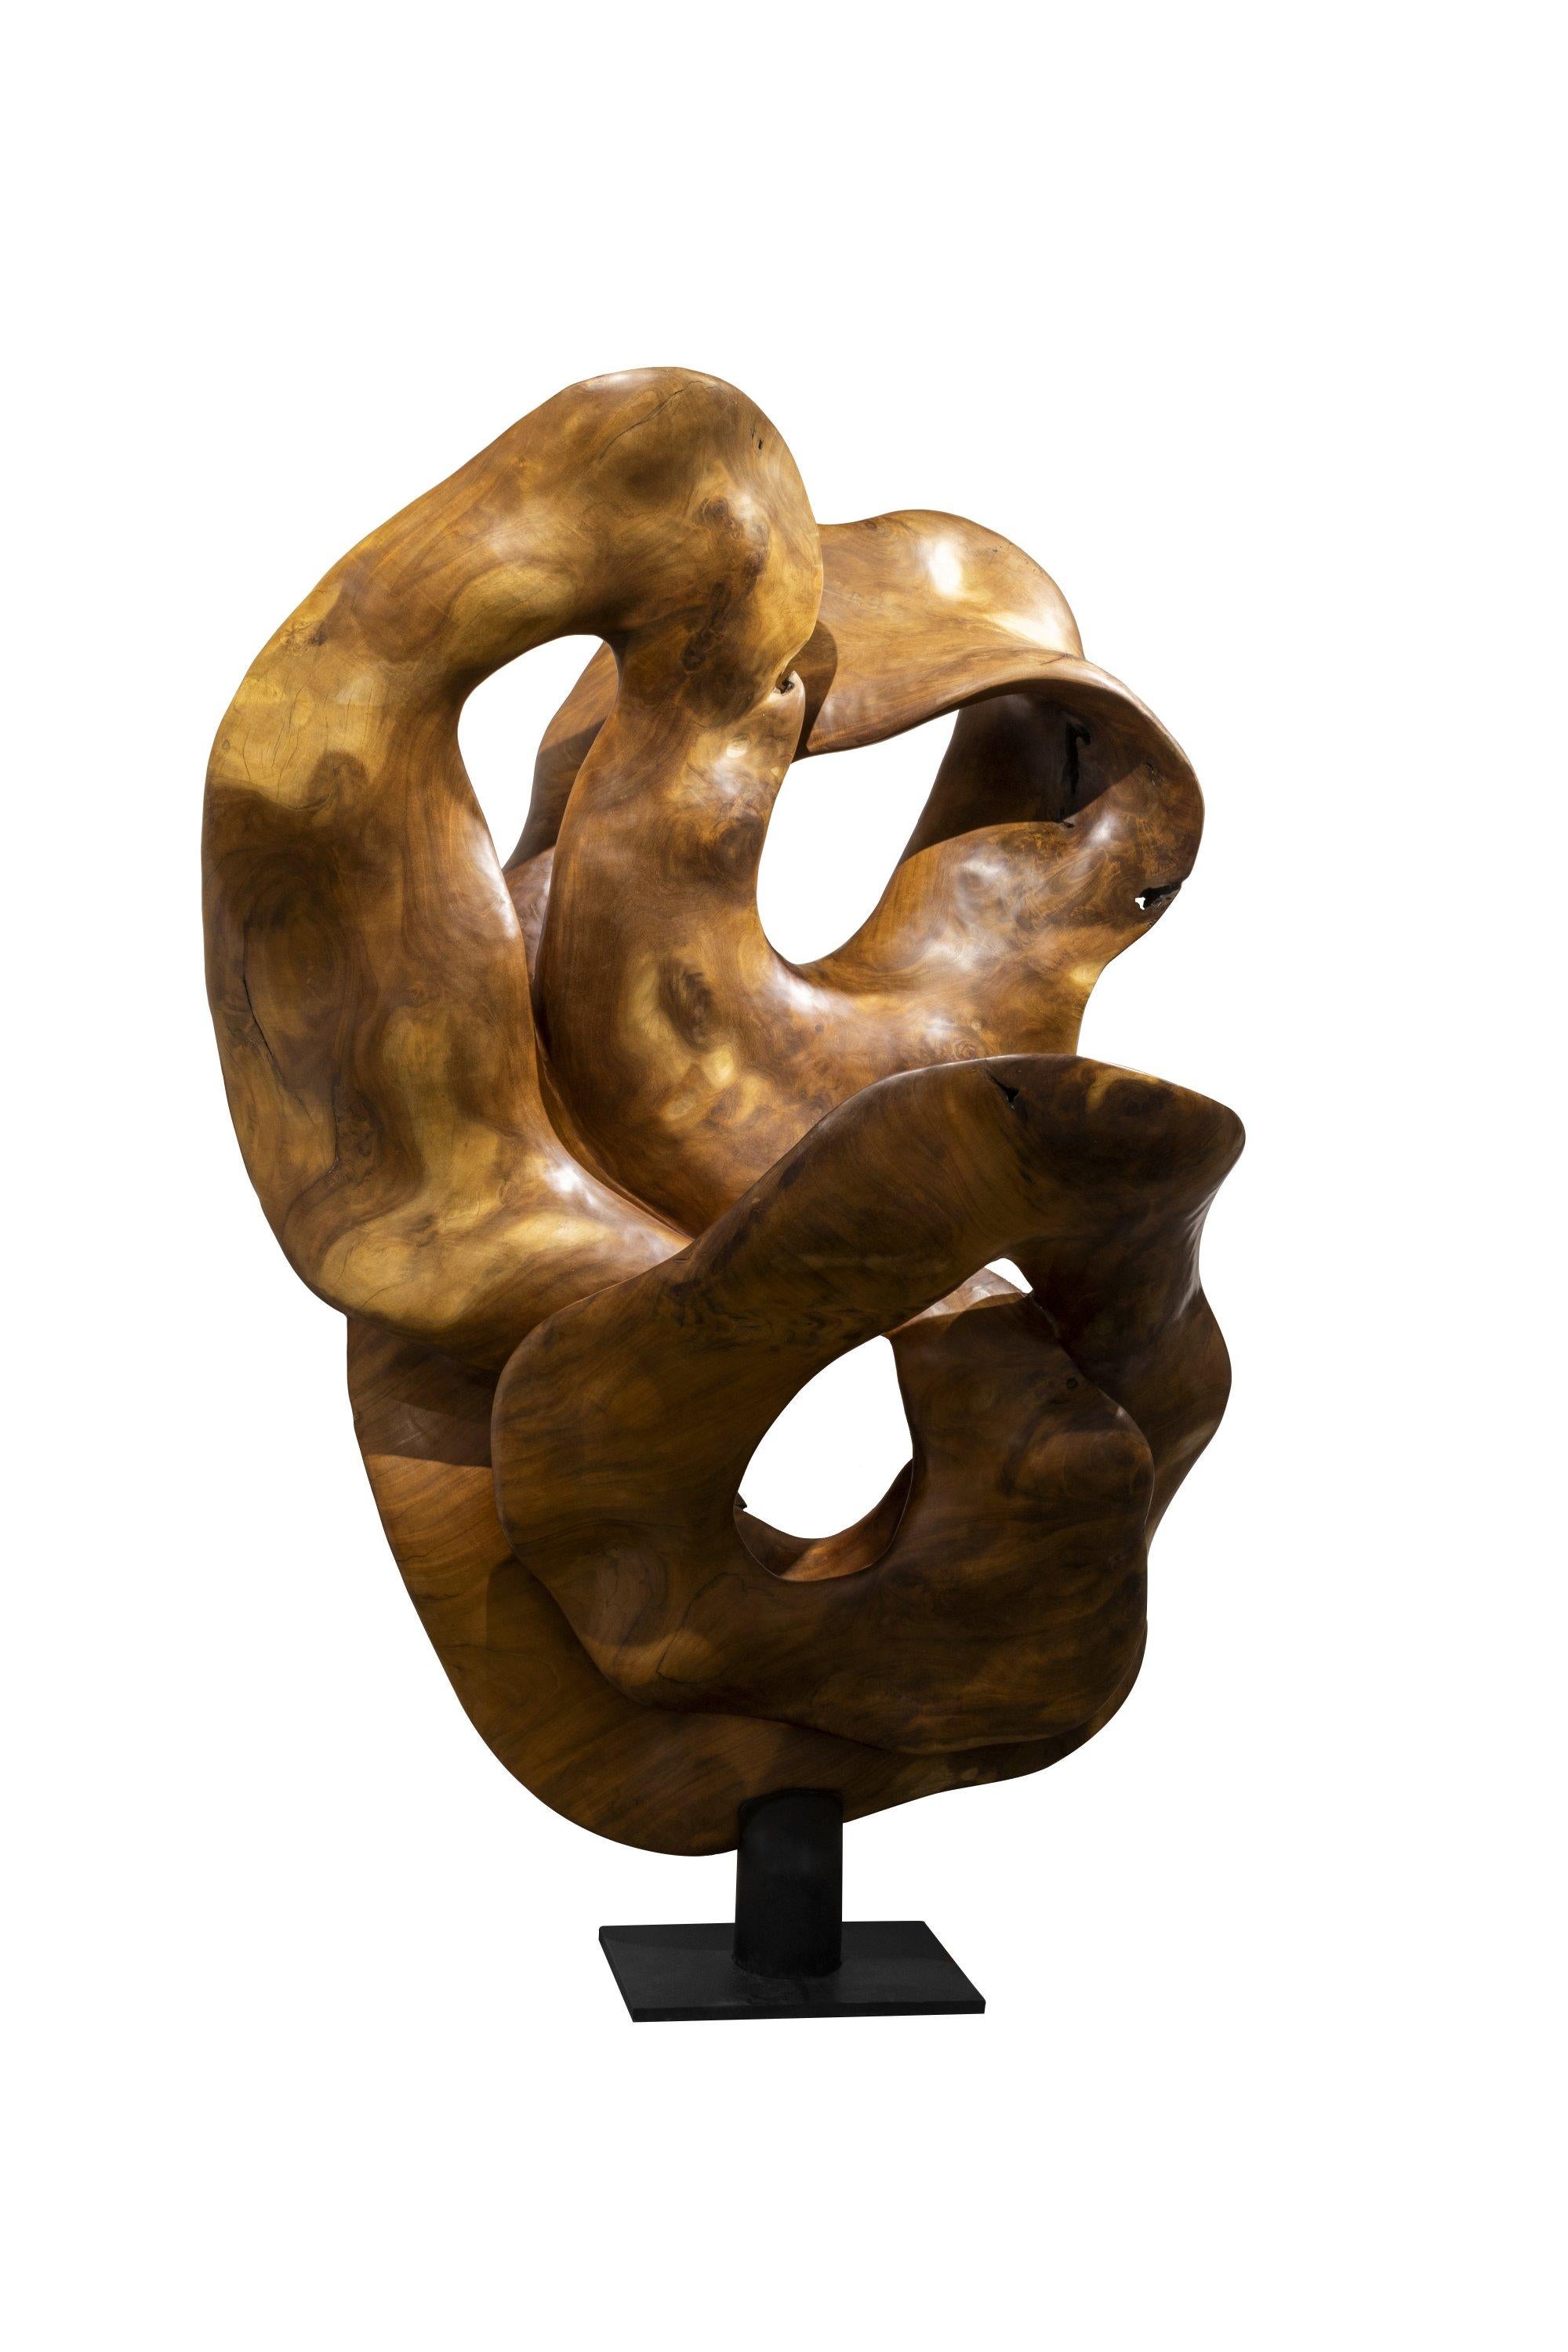 Abrazo - 21st Century, Contemporary, Abstract Sculpture, Mahogany Root, Wood